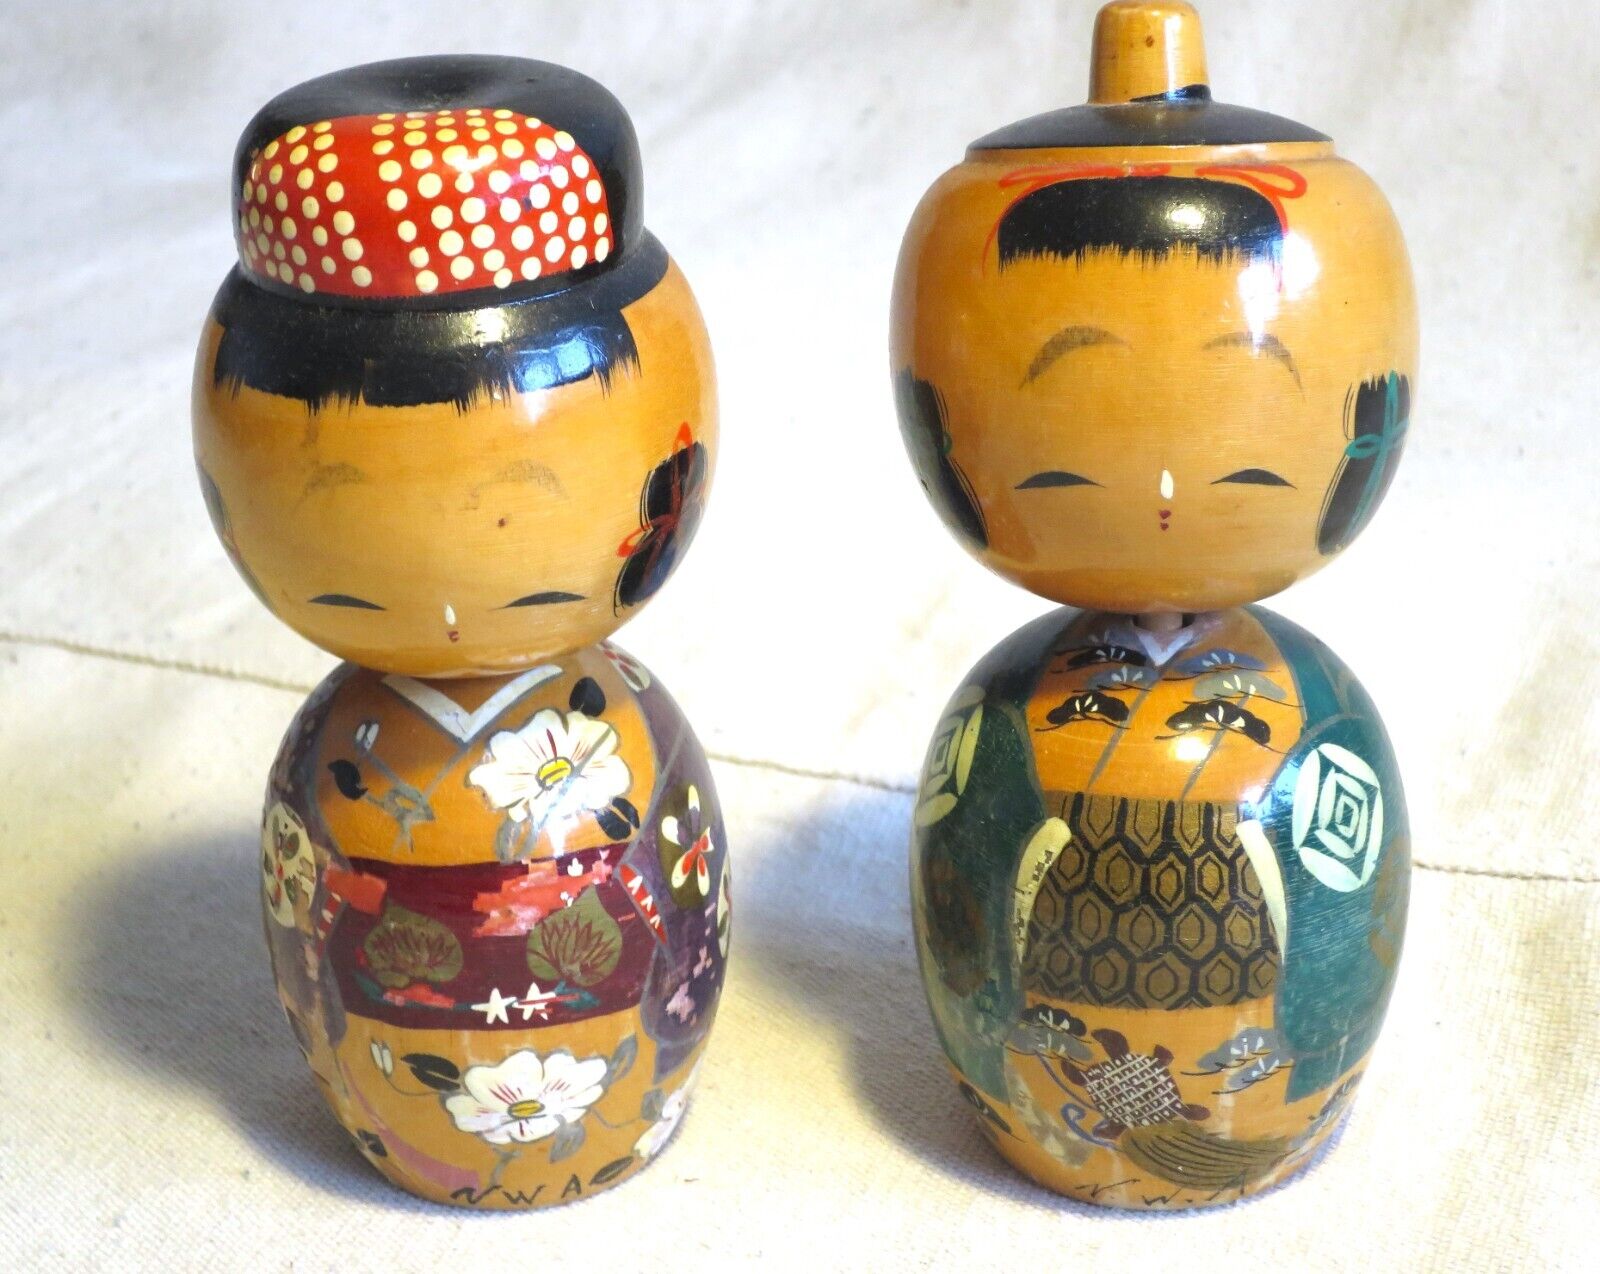 Two Authentic Japanese KOKESHI Wooden Dolls, Japan - 6.5